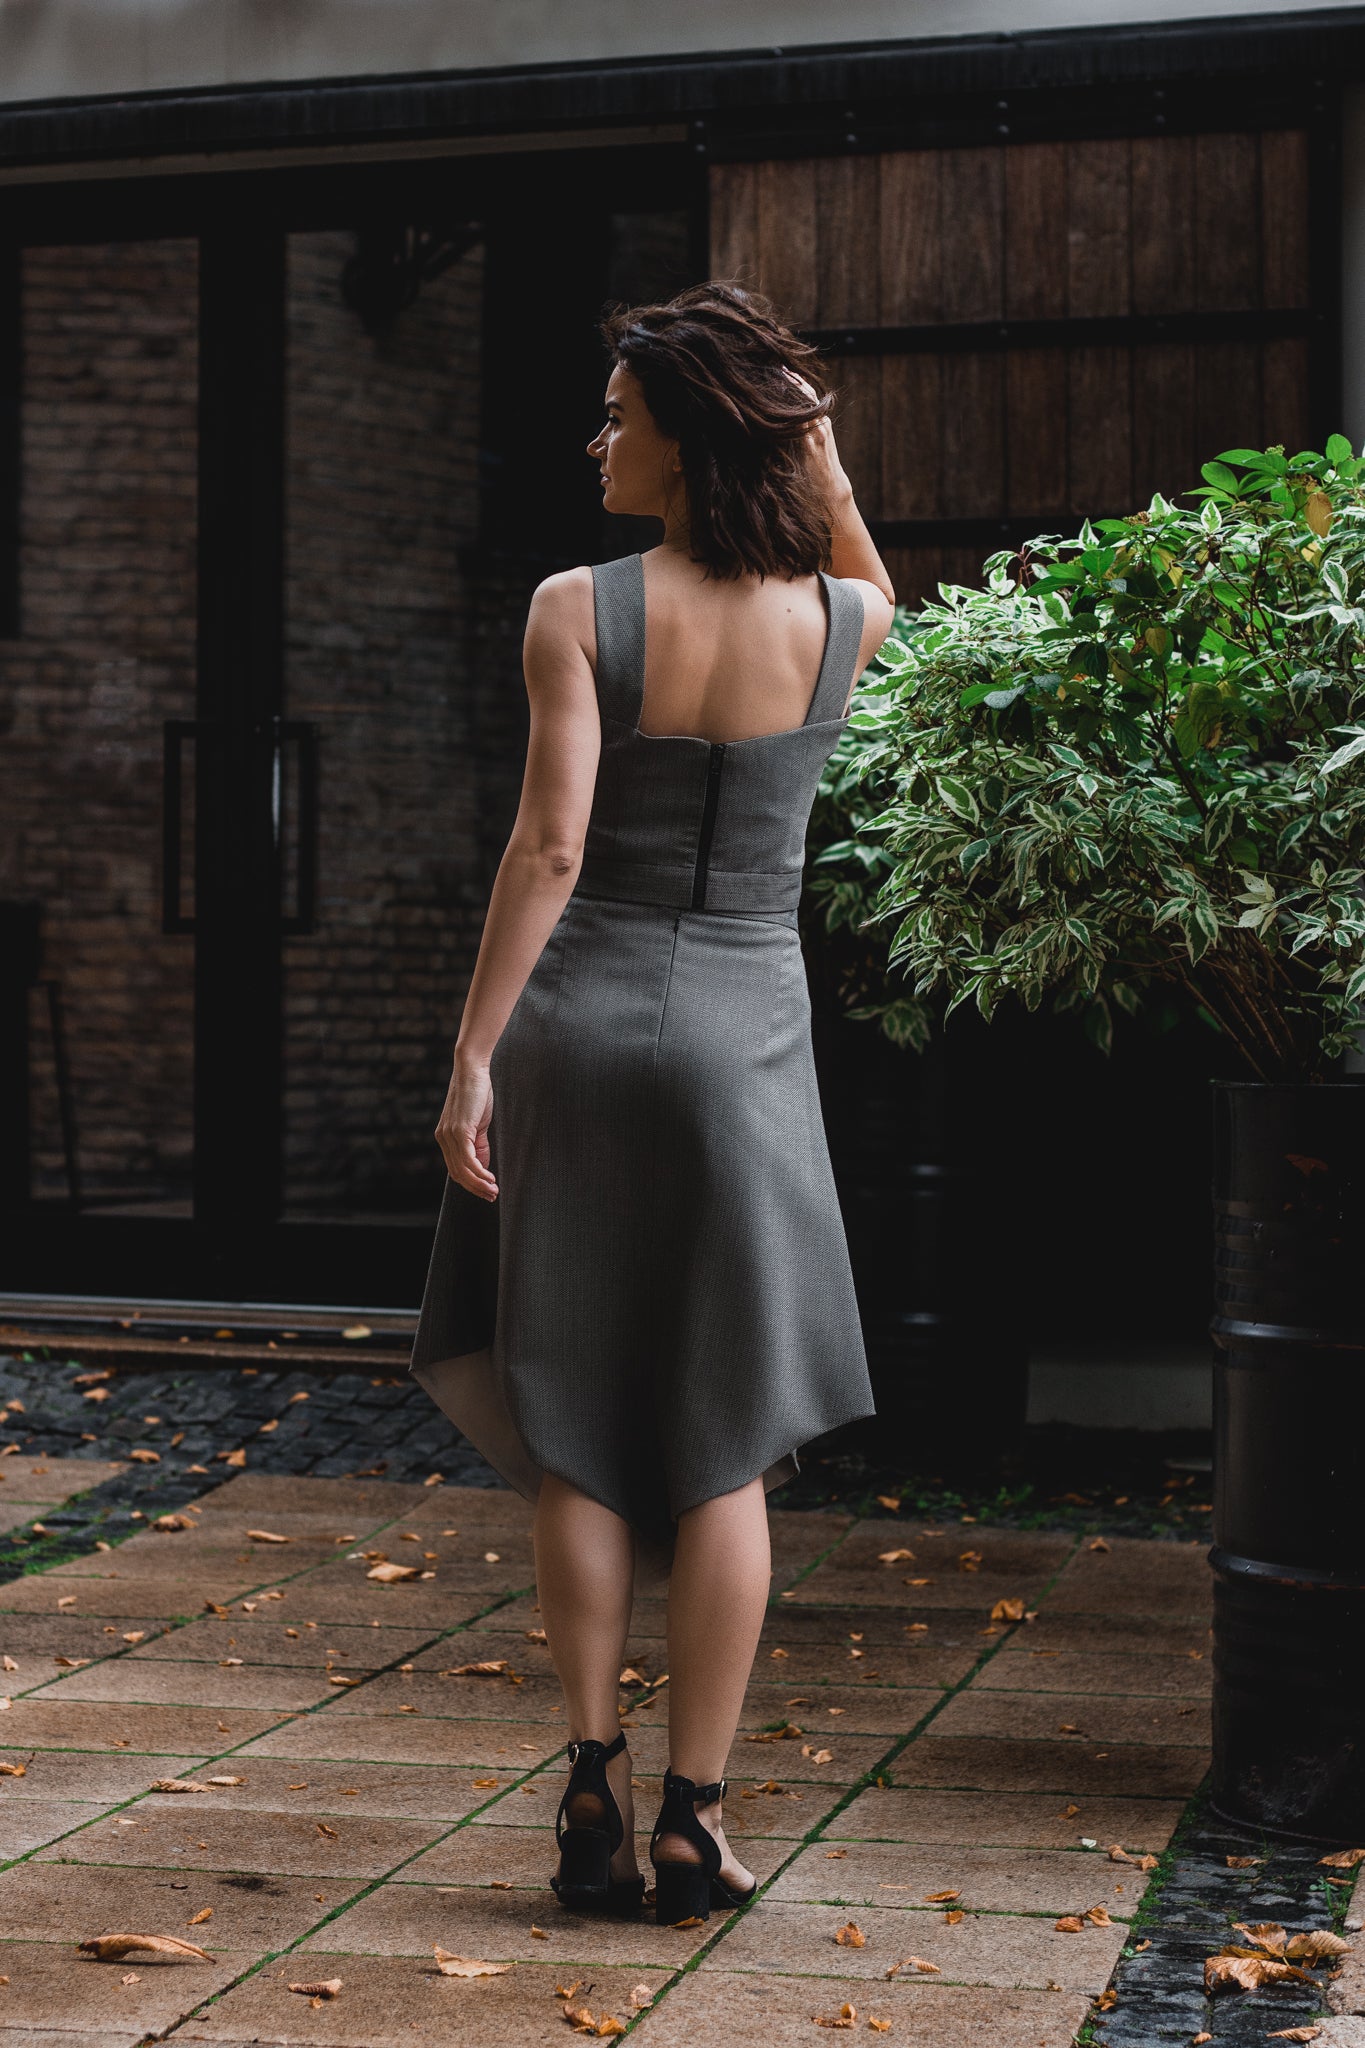 beautiful brunette on the streets in a gray two piece office dress - a corset top and a triangle skirt. the top has a cute, high quality black tractor zipper